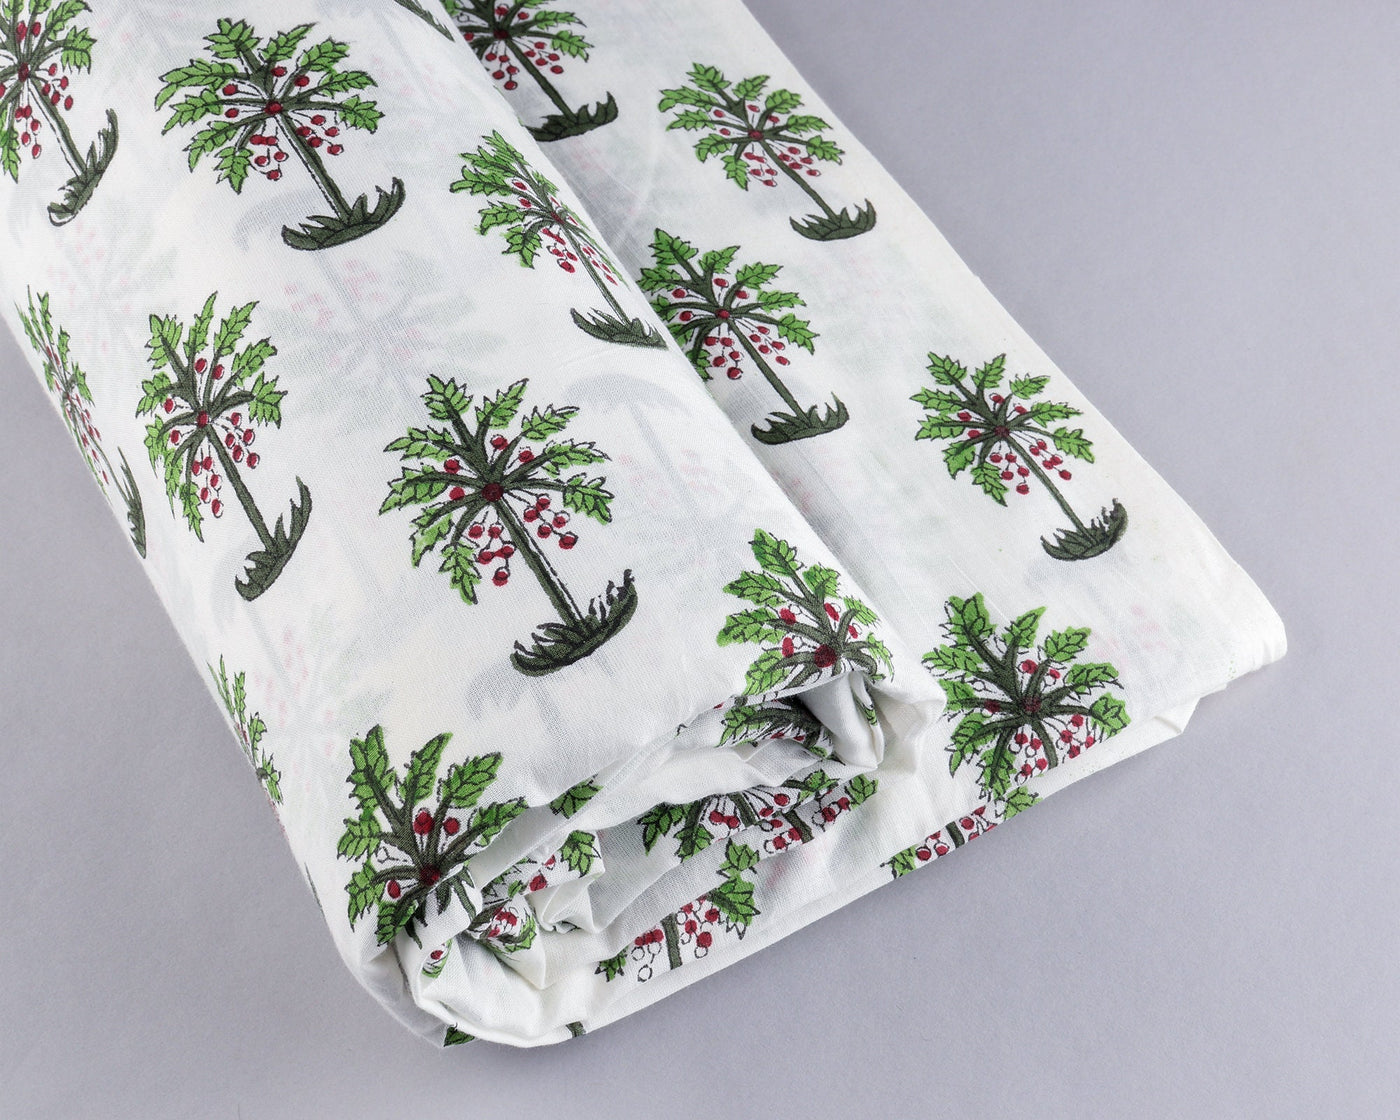 Fabricrush Grass Green, Dark Green and Burgundy Red Indian Hand Block Palm Tree Printed 100% Pure Cotton Cloth, Fabric by the yard, Women's Clothing